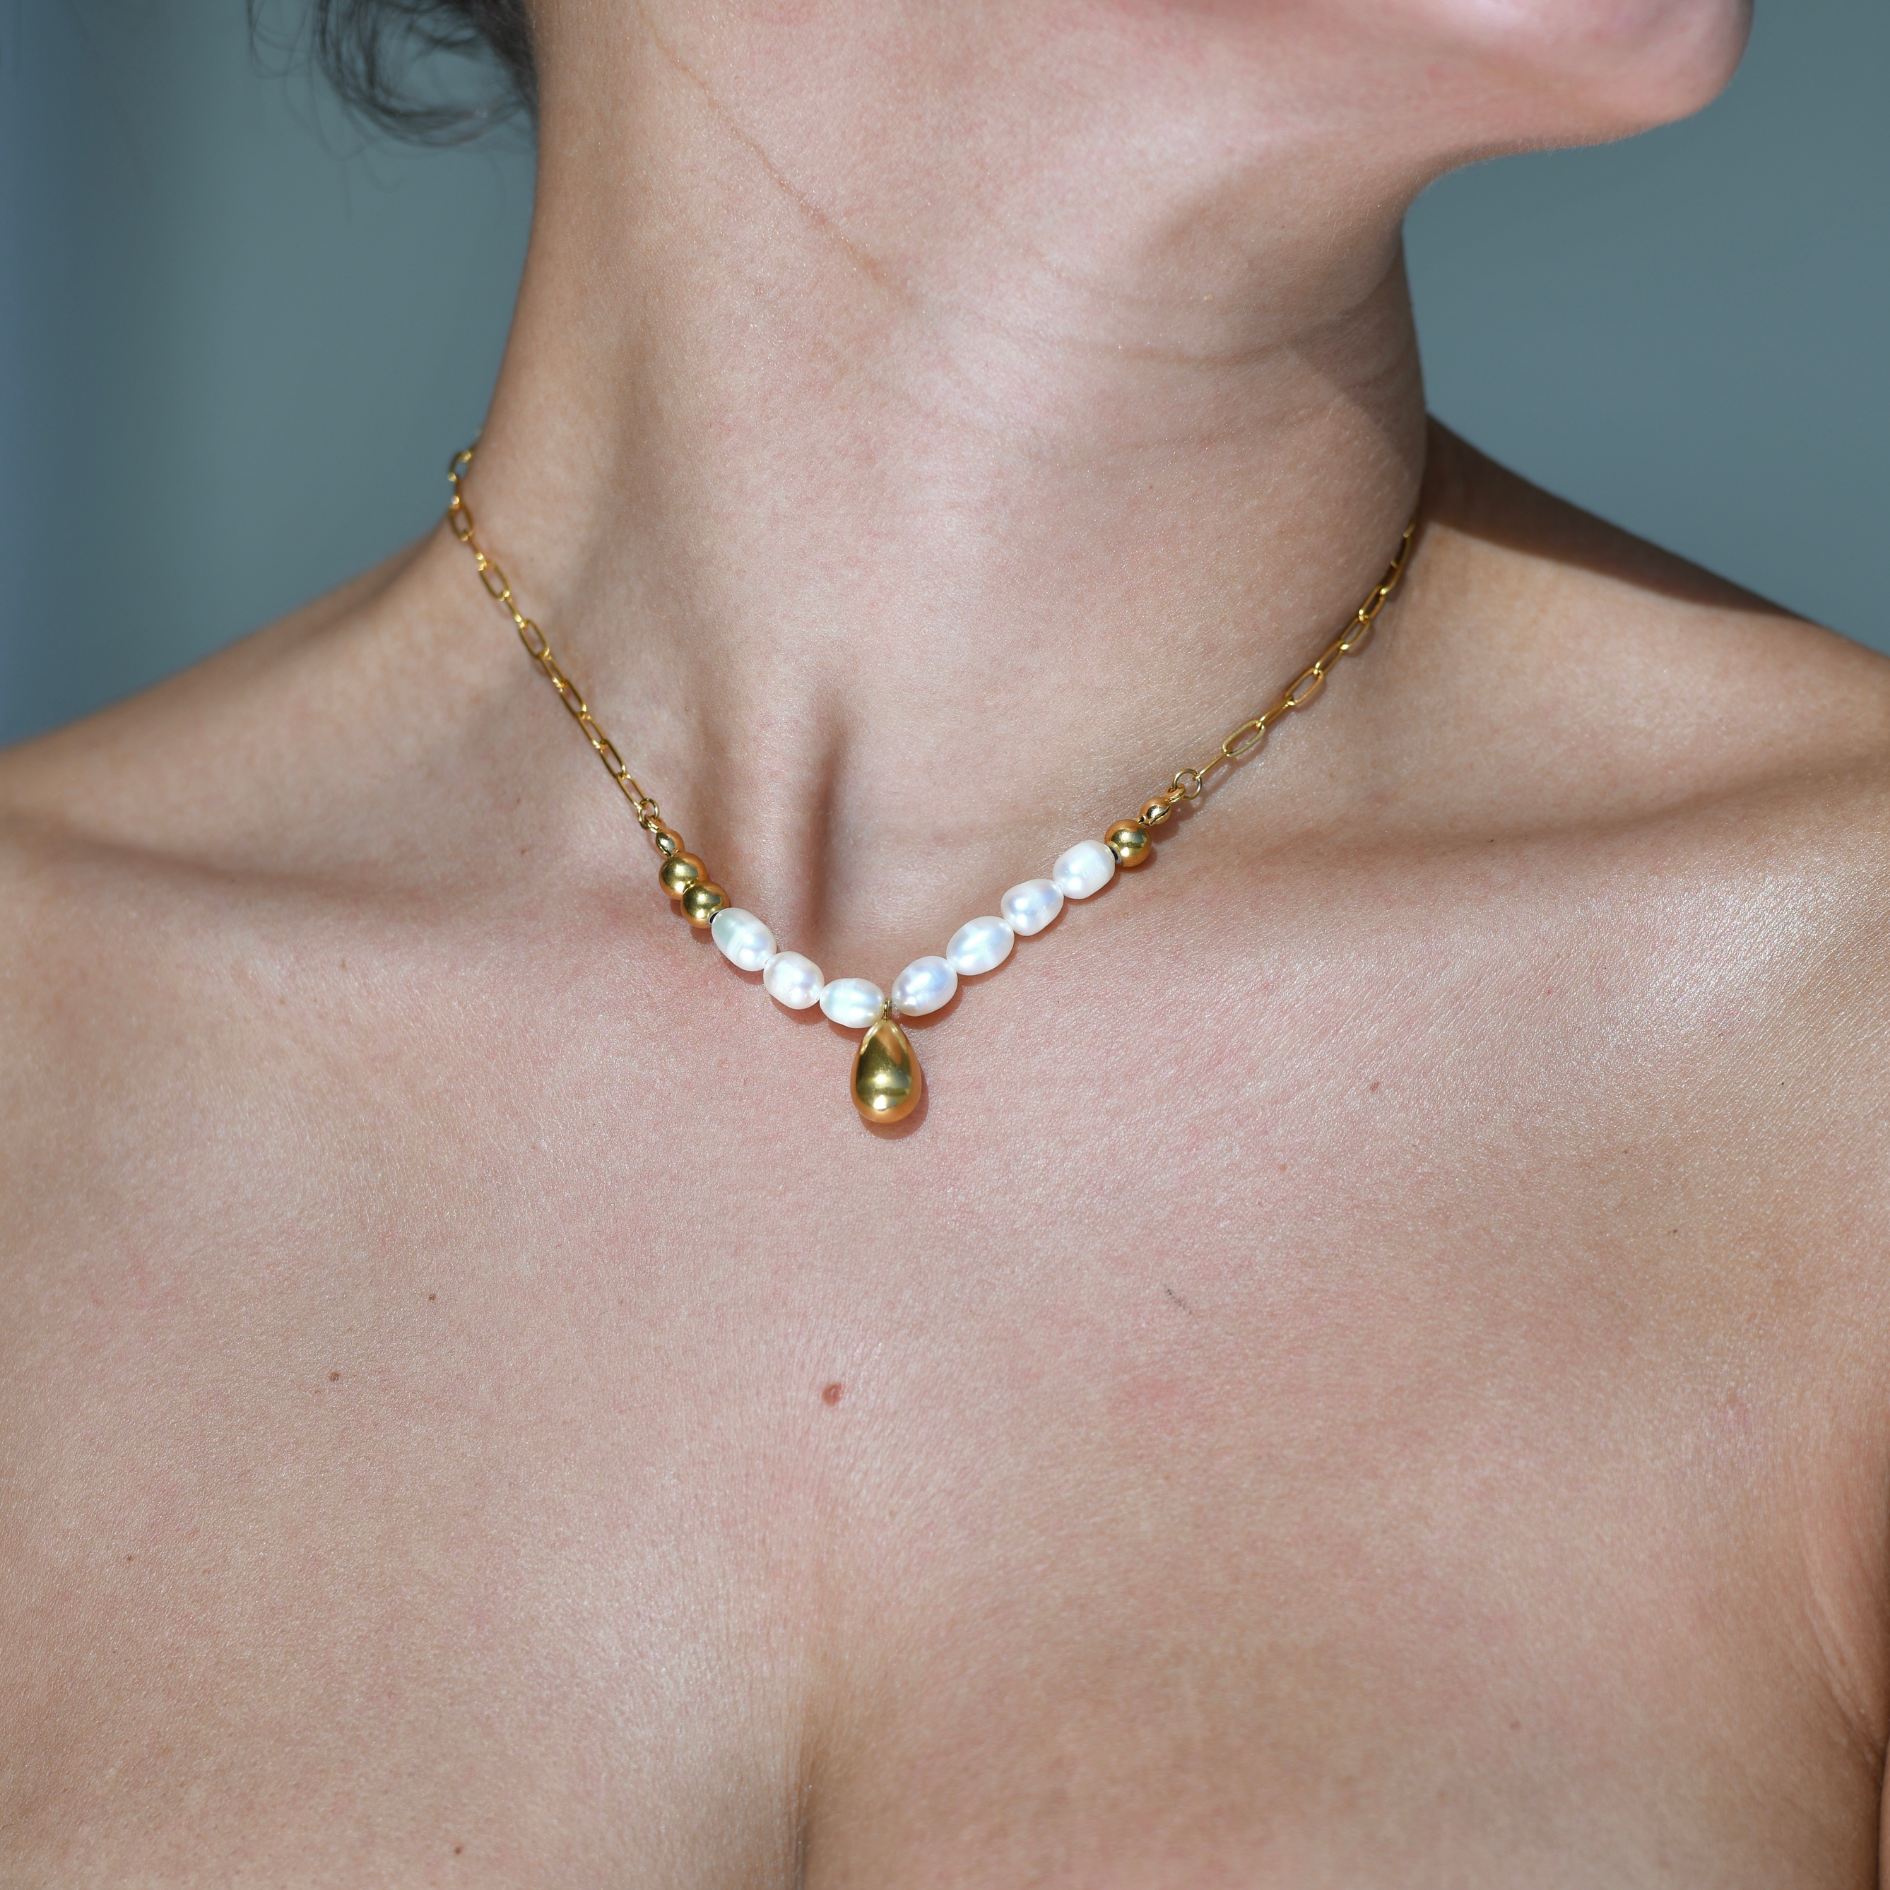 RAIN Pearls Gold Drop Necklace - Gold plated necklace.Fold Chain and White pearl and a gold plated waterdrop shape pendant in the middle of the pearls.